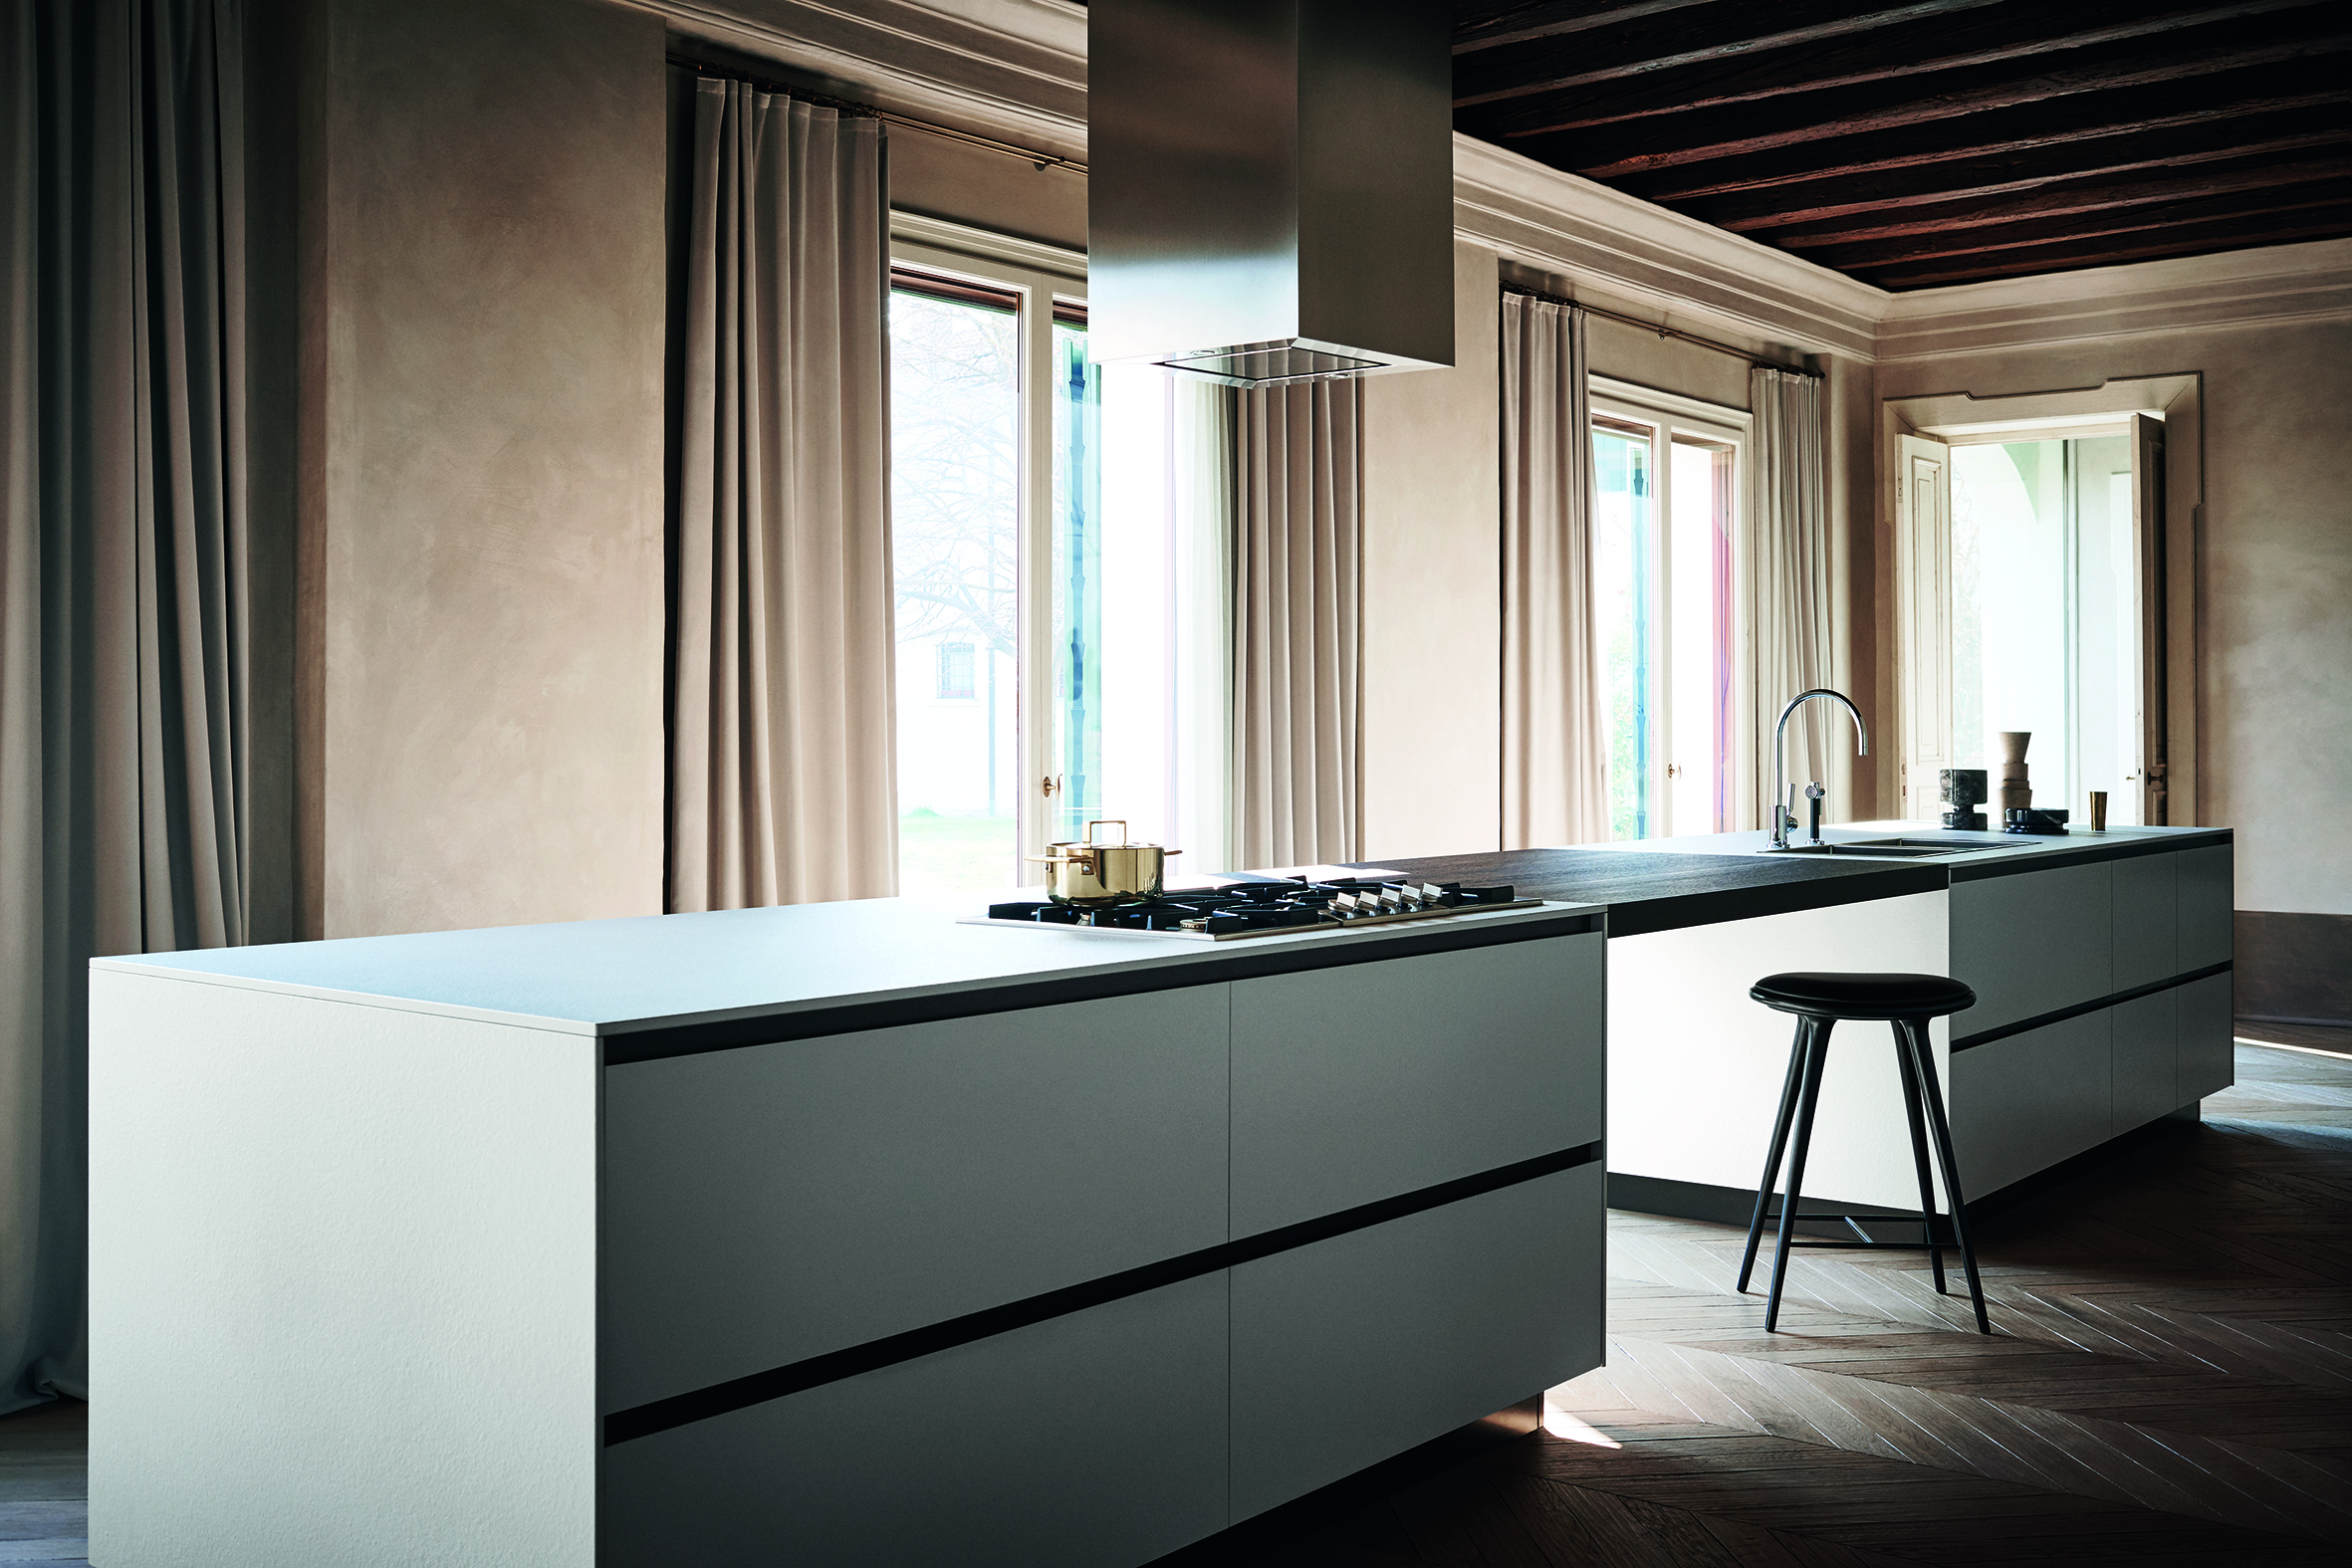 Maxima 2.2 kitchen by Cesar